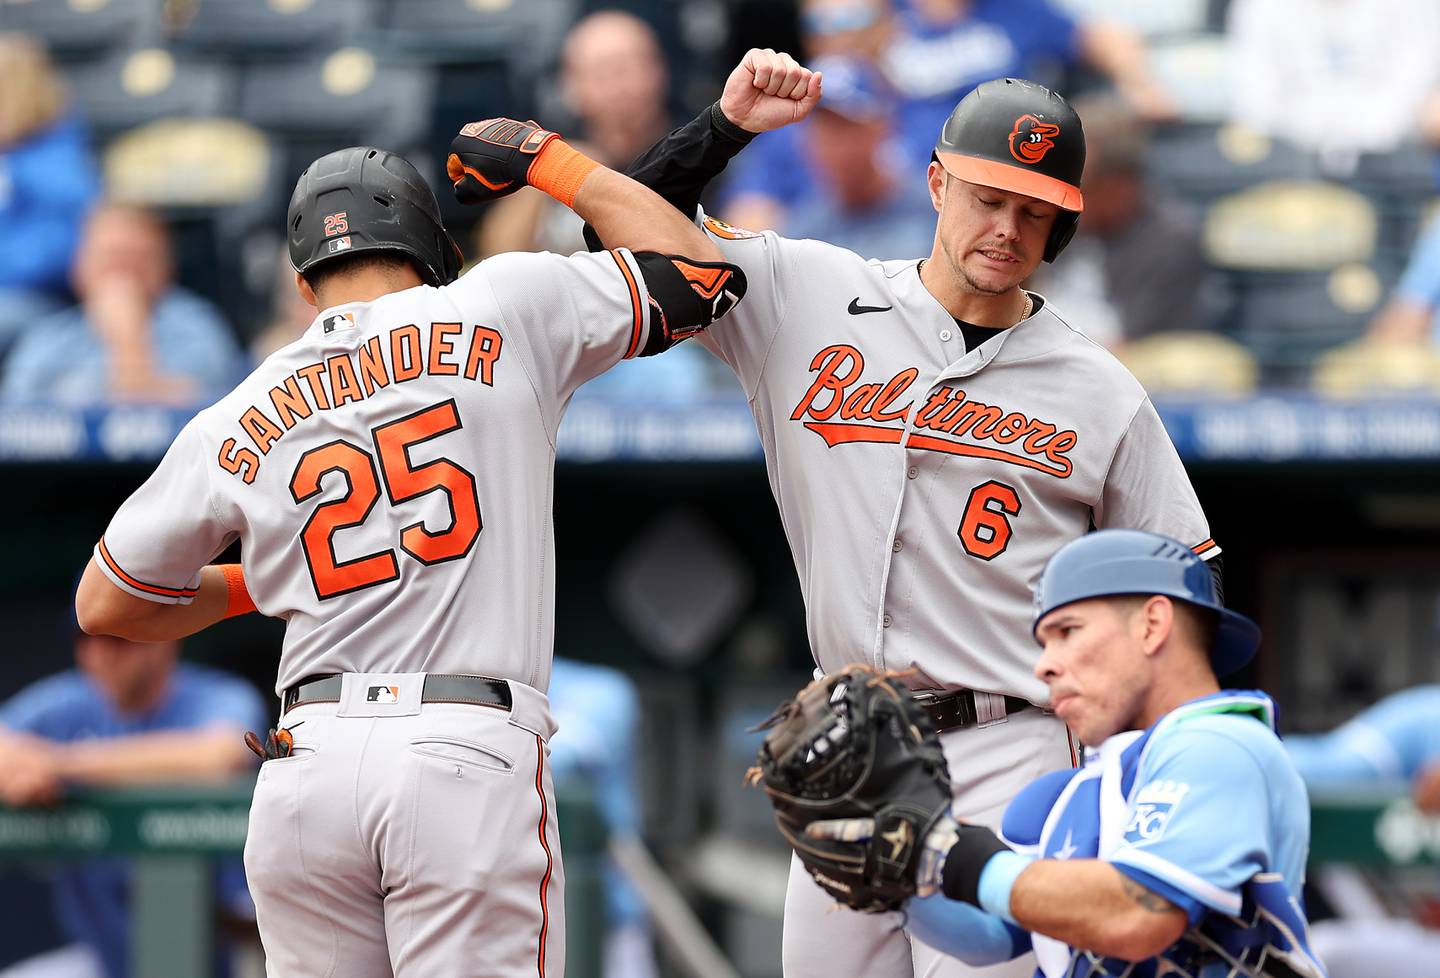 Anthony Santander #25 of the Baltimore Orioles is congratulated by Ryan Mountcastle #6 after hitting a 2-run home run during the 1st inning of the game against the Kansas City Royals at Kauffman Stadium on May 04, 2023 in Kansas City, Missouri.